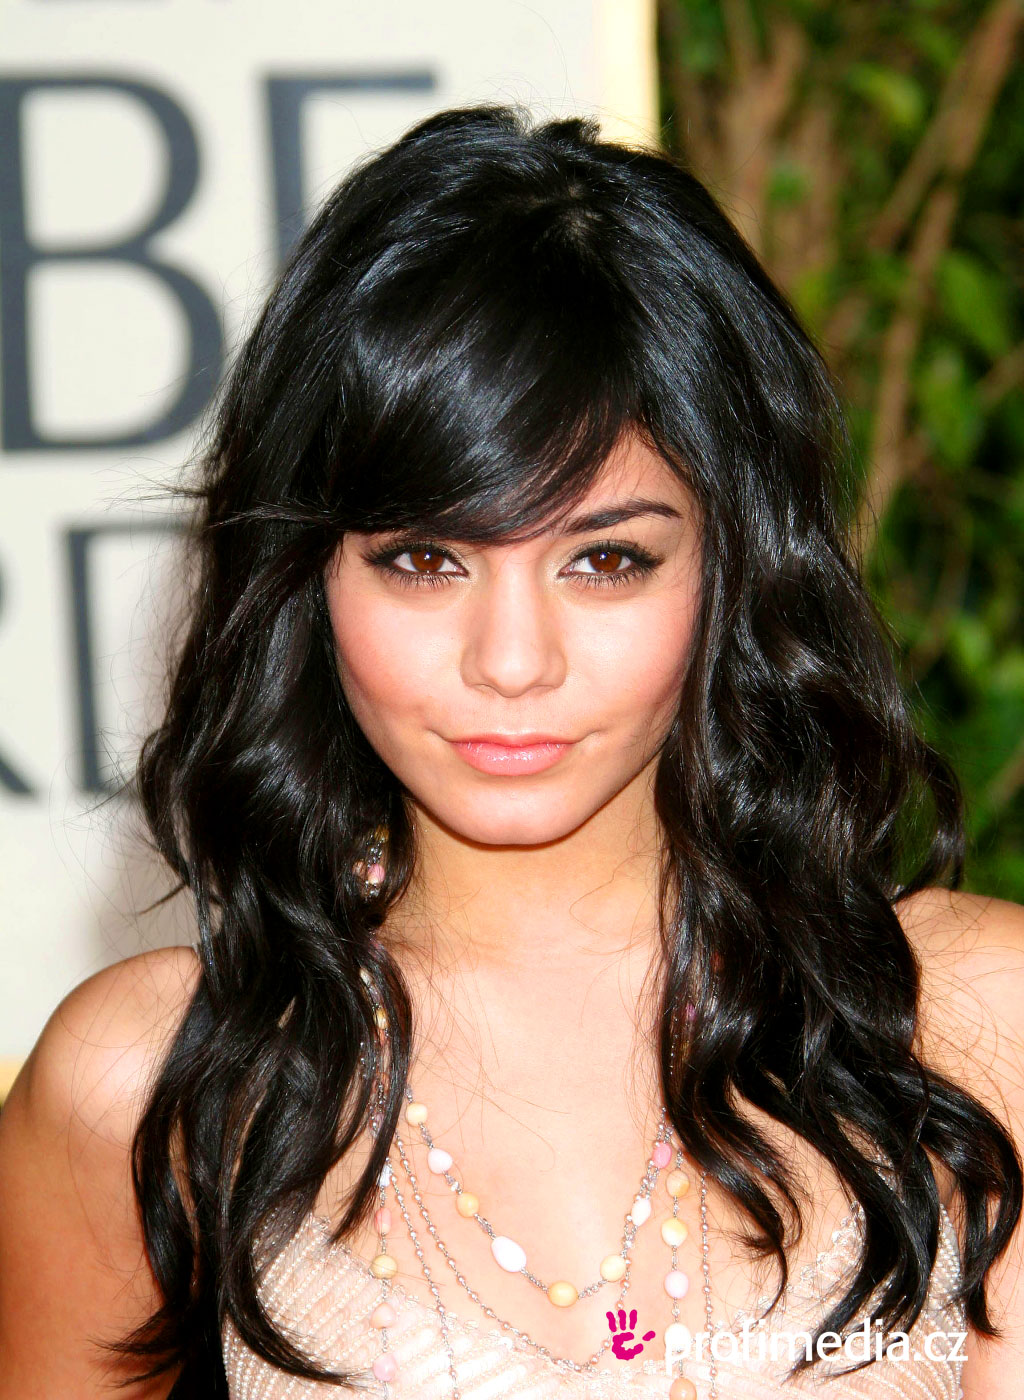 Dark Long Hairstyles With Highlights Vanessa Hudgens Hairstyles for 2011 - Celebrity Hairstyle Ideas